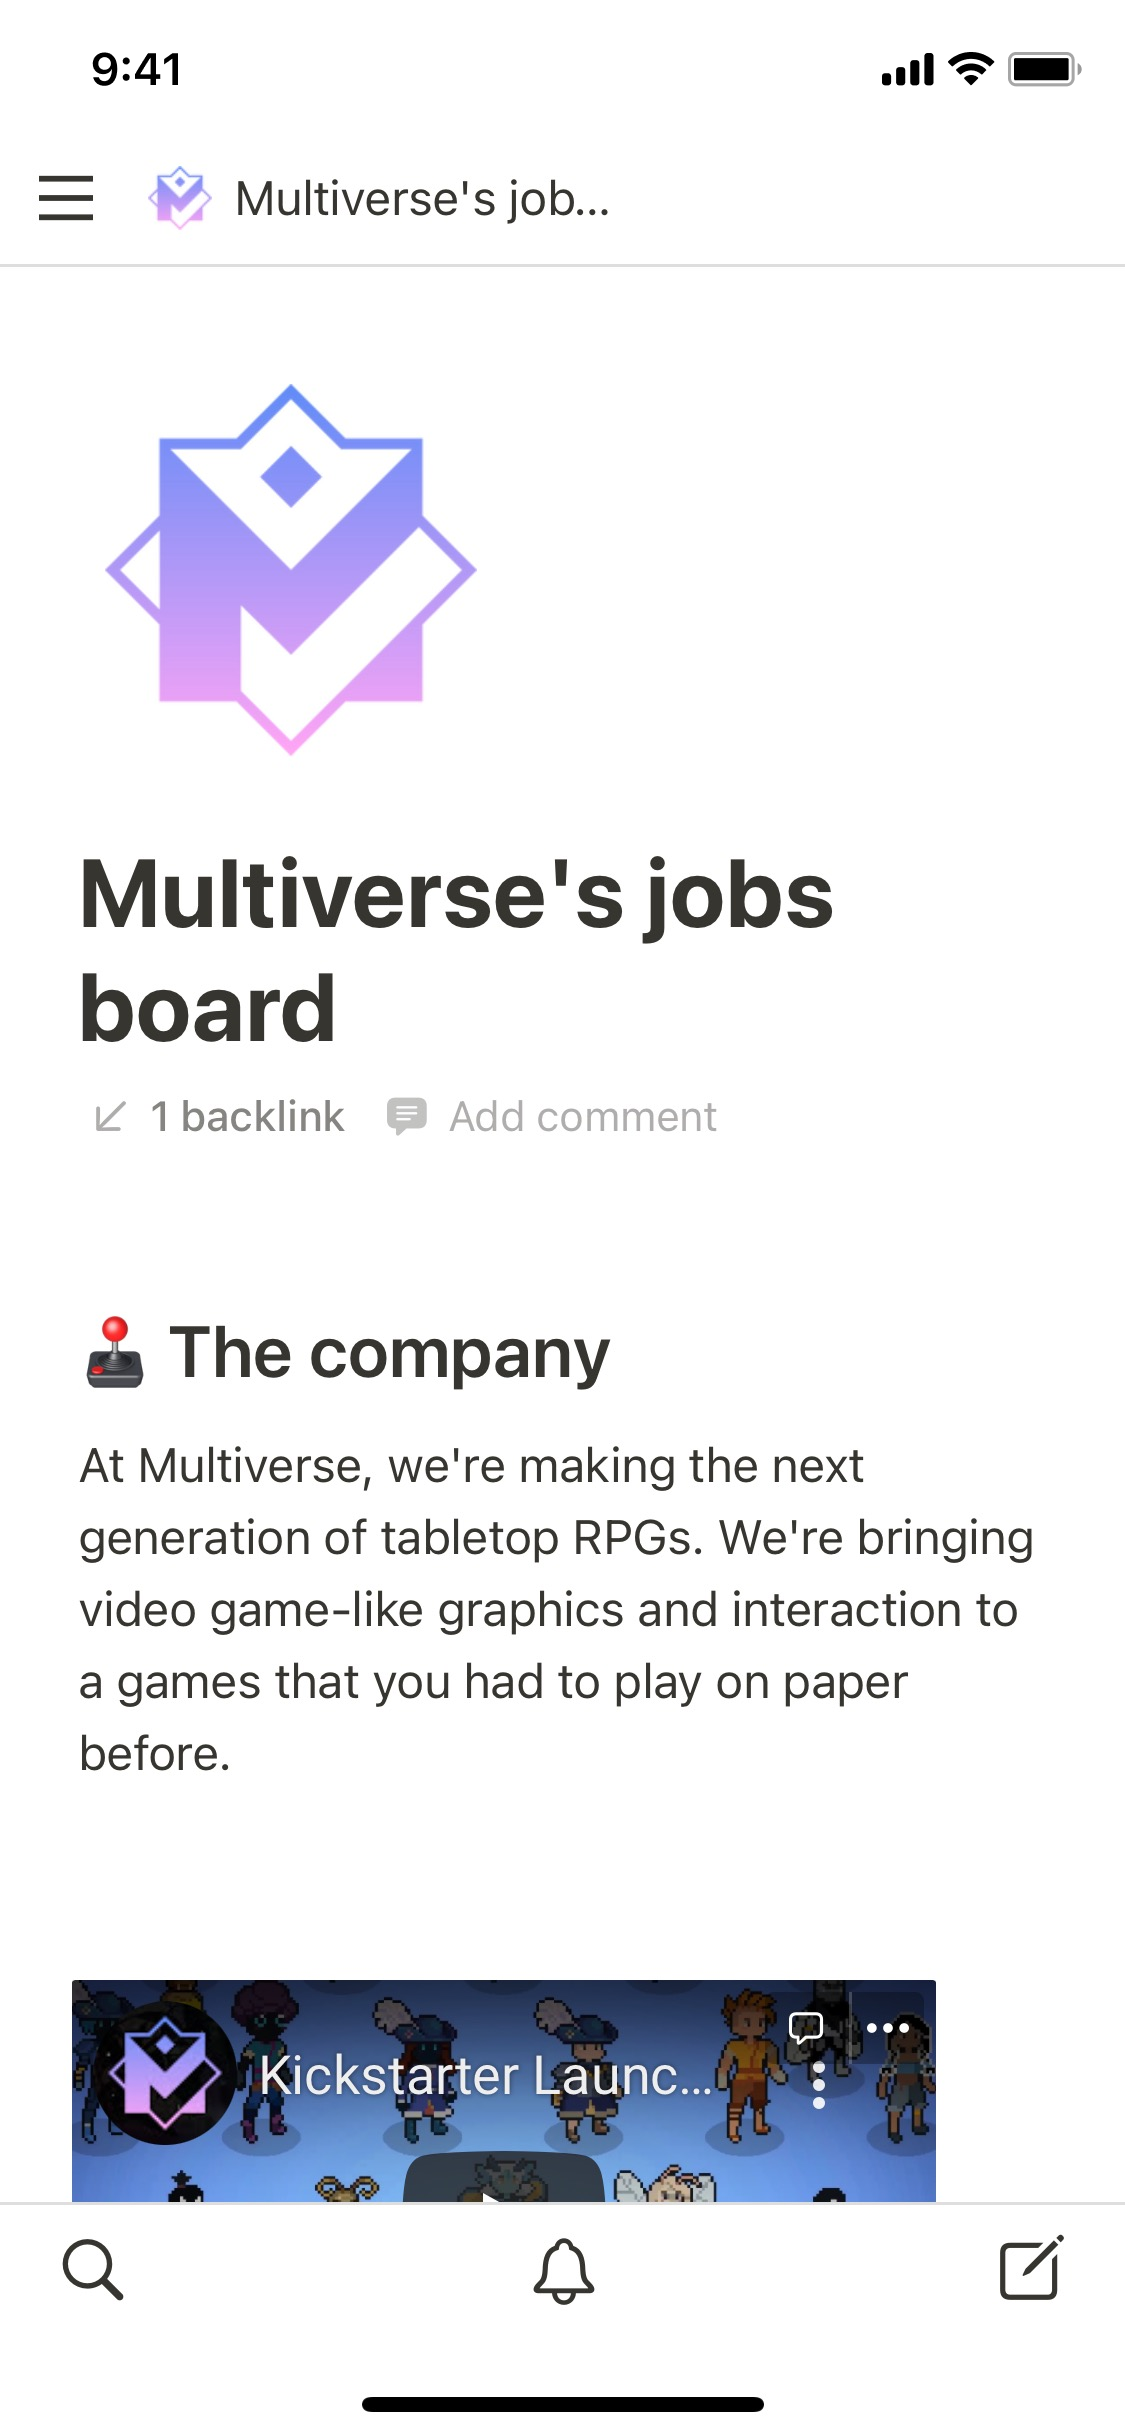 The mobile image for the Multiverse's jobs board template